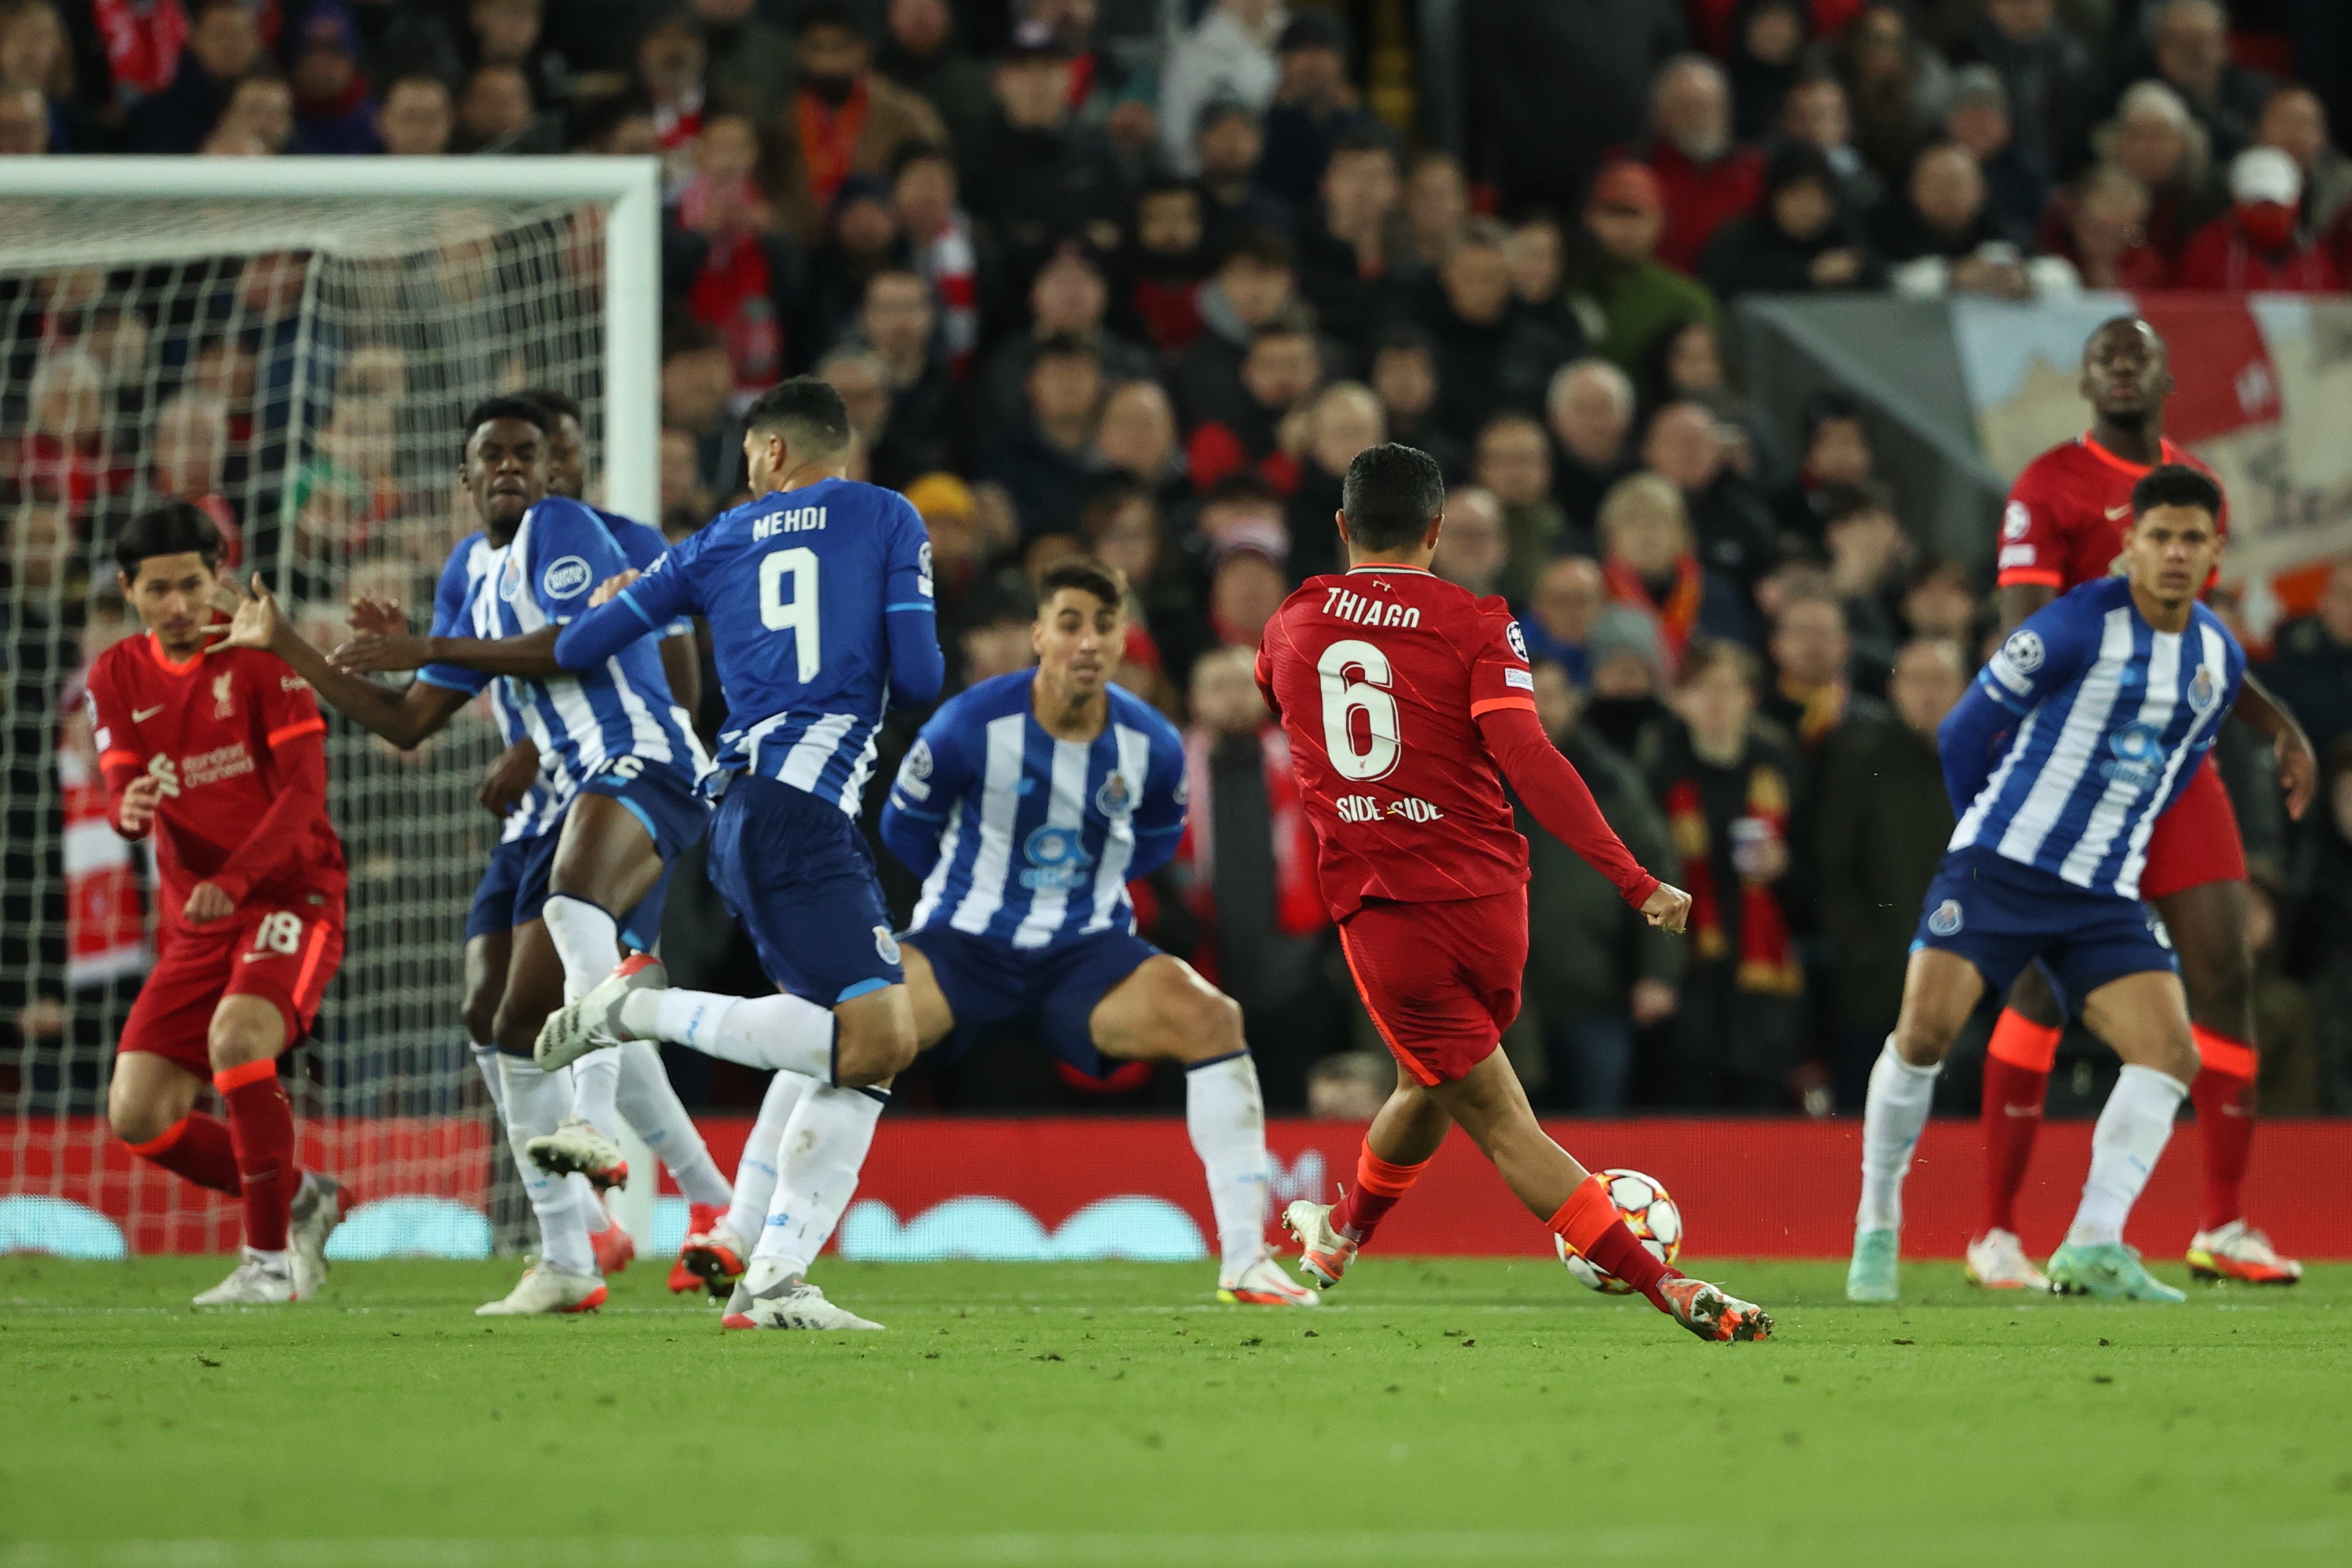 Watch: Thiago Alcantara scores jaw-dropping goal for Liverpool in the Champions League